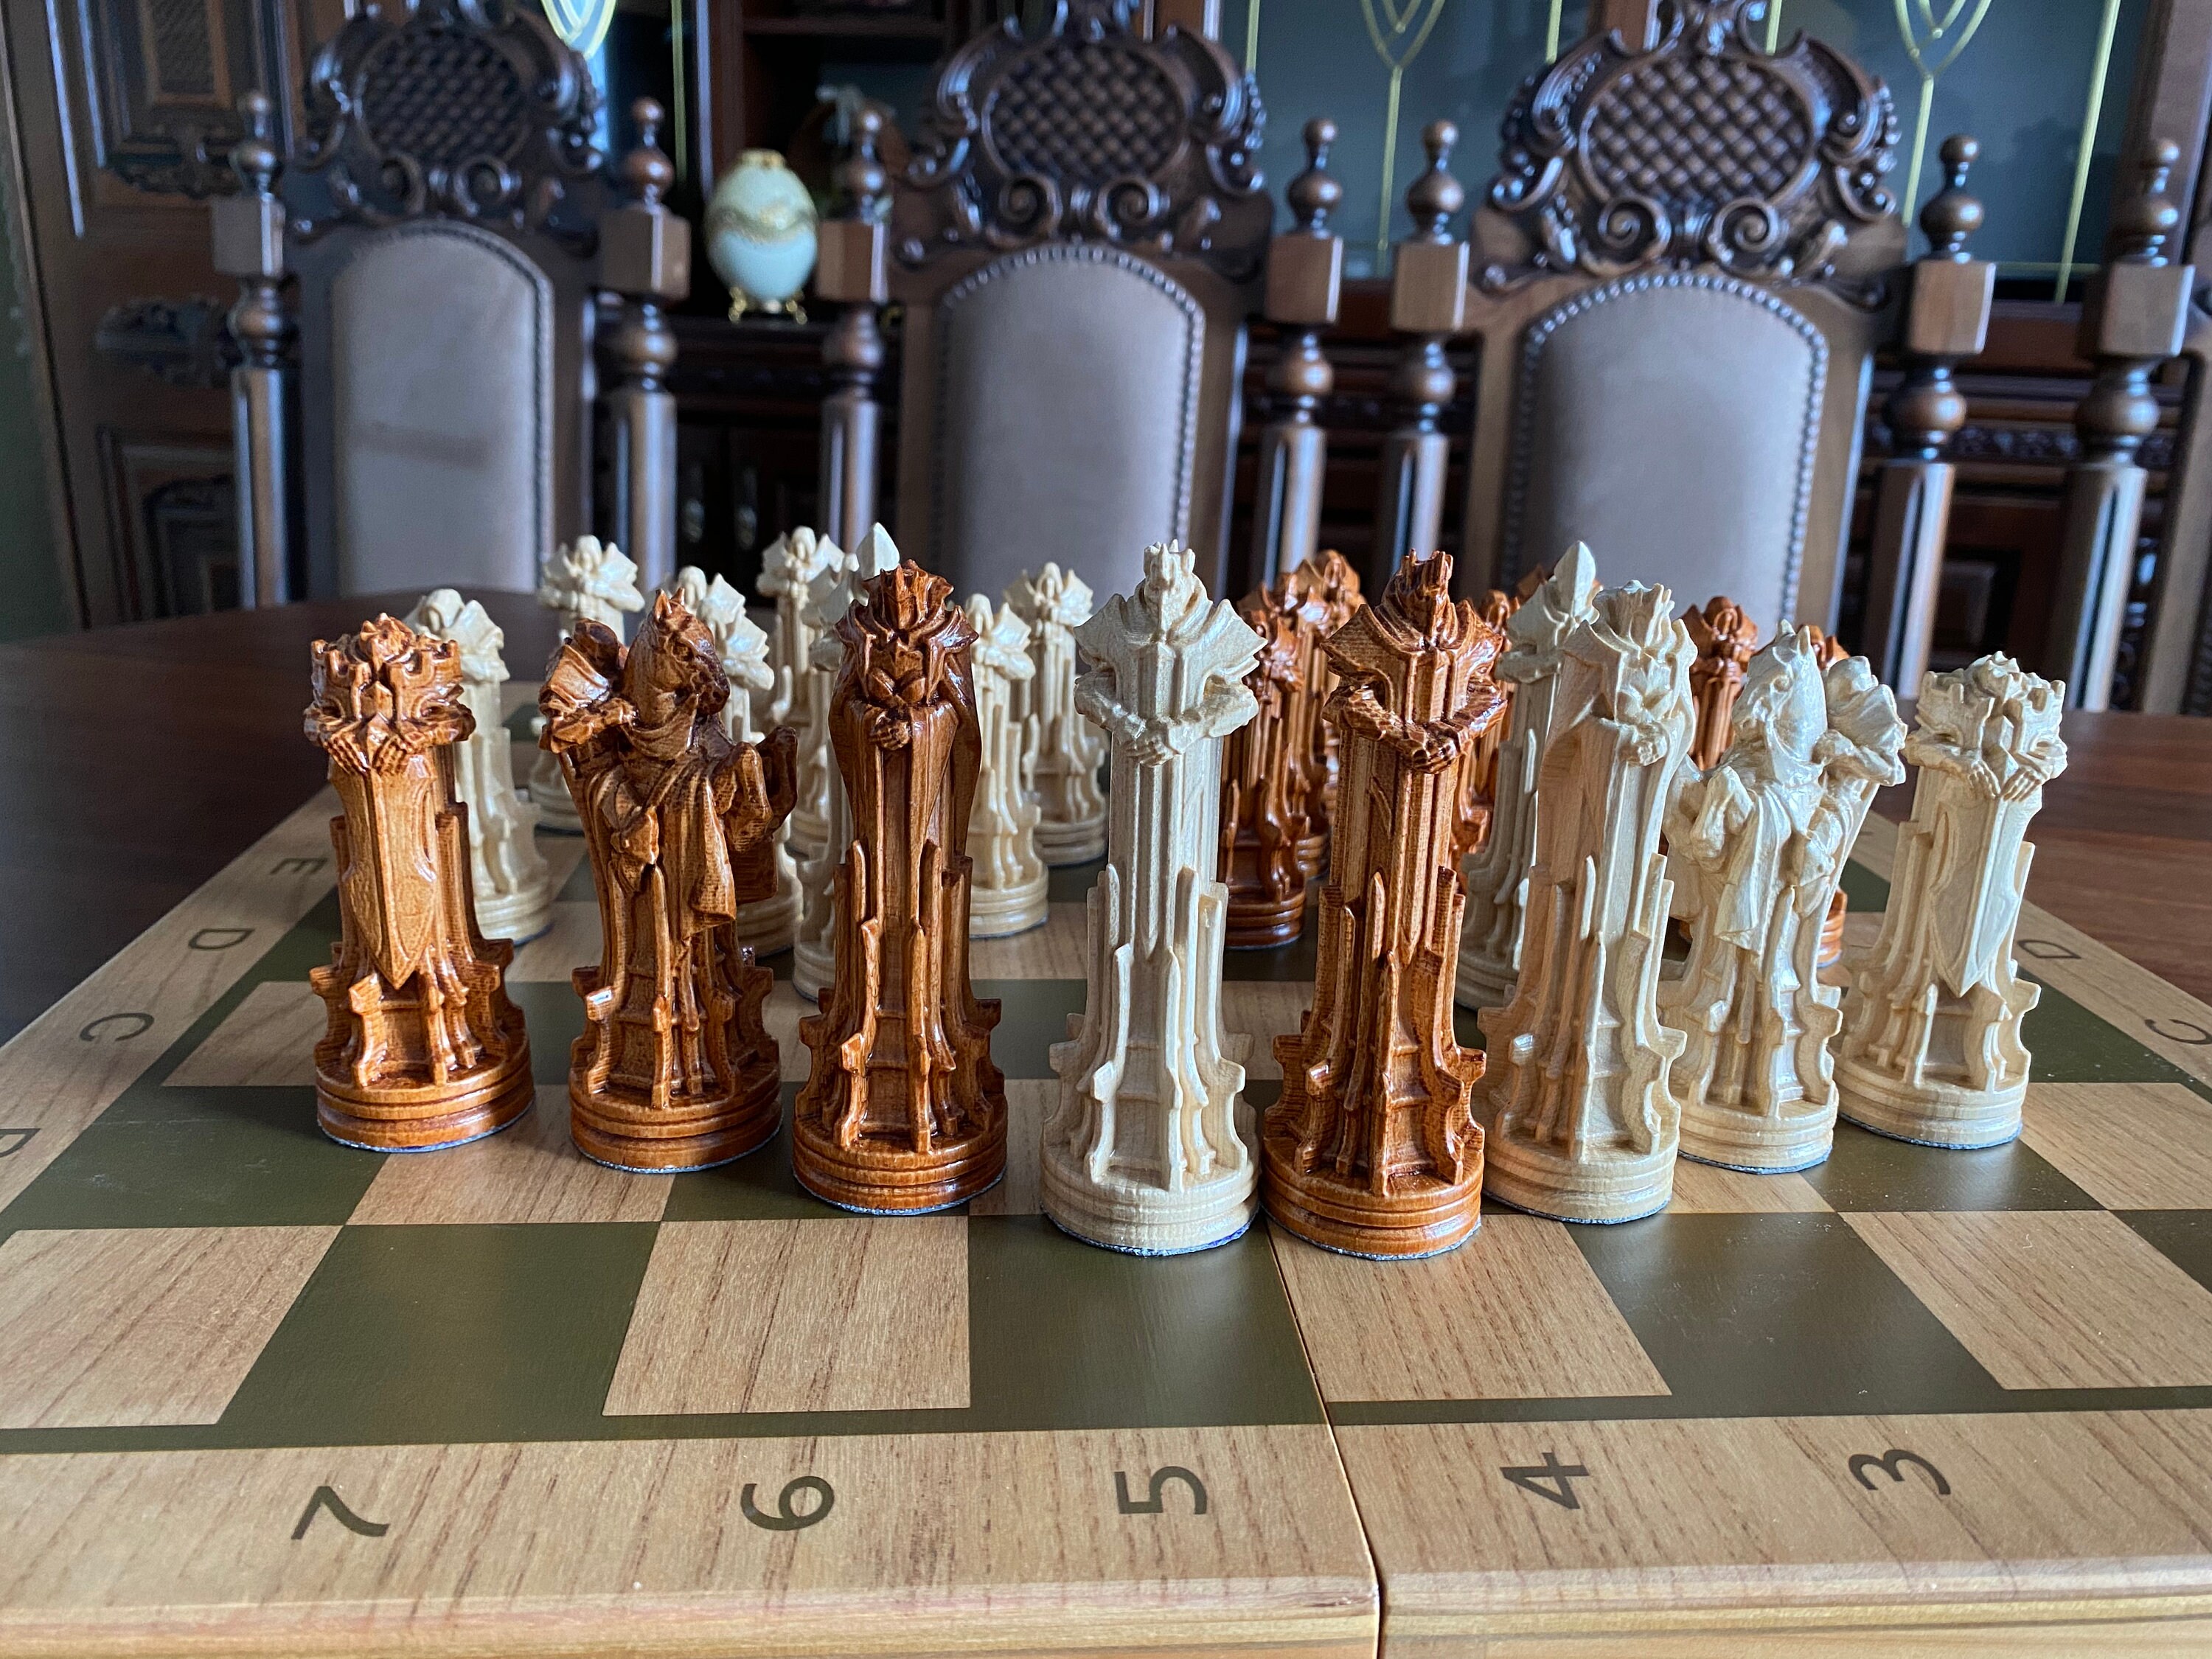 Wooden Chess Pieces palladin, Original Chess Pieces, Wood Carving